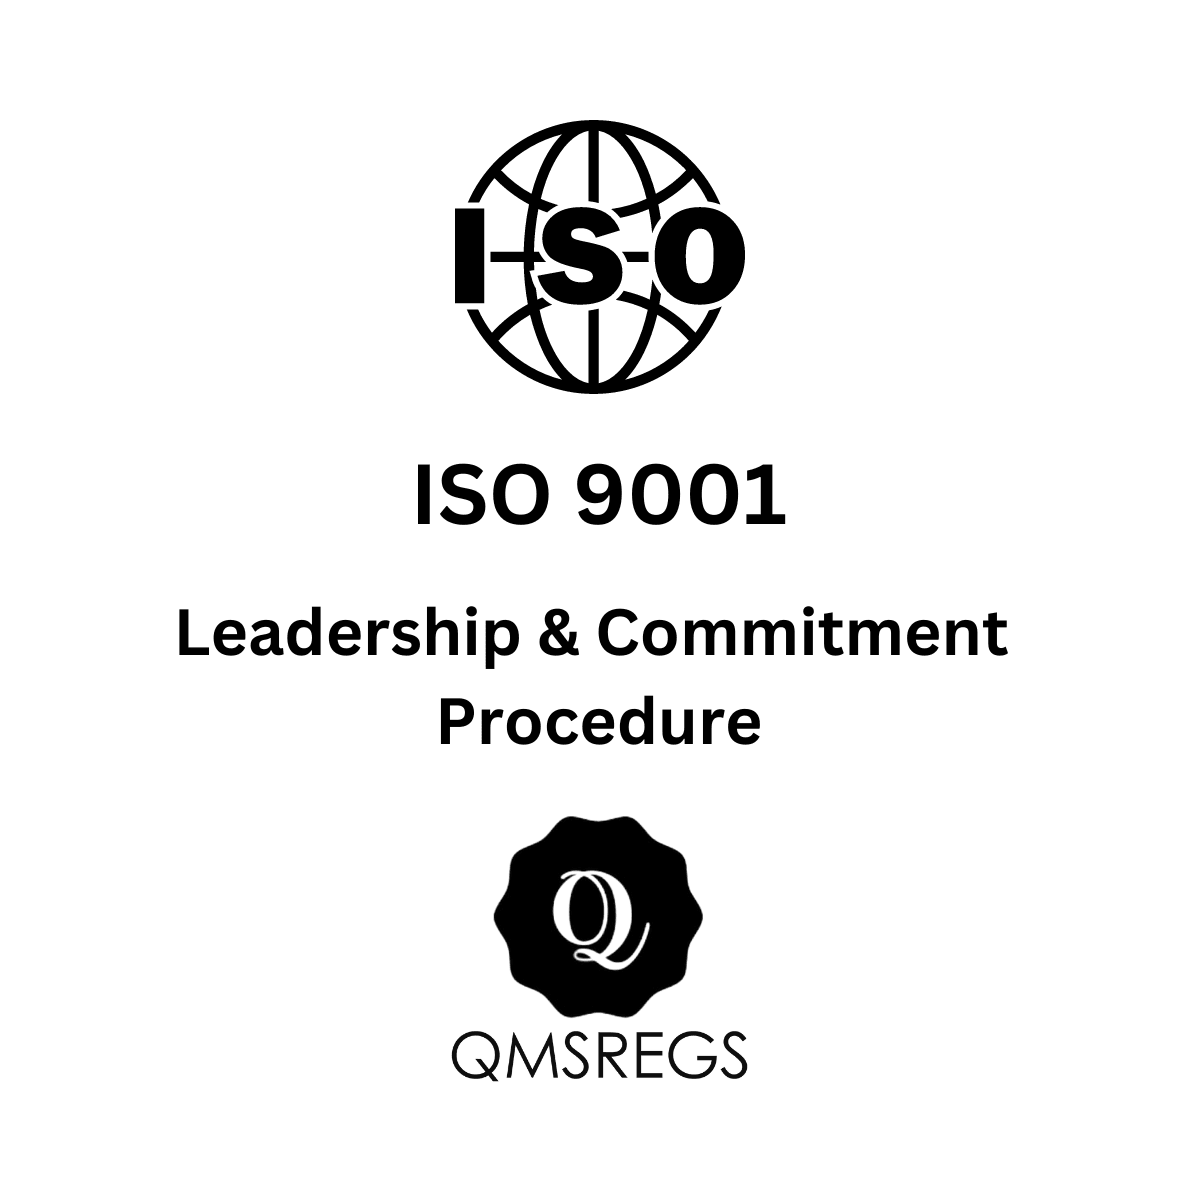 ISO 9001 Leadership and Commitment Procedure